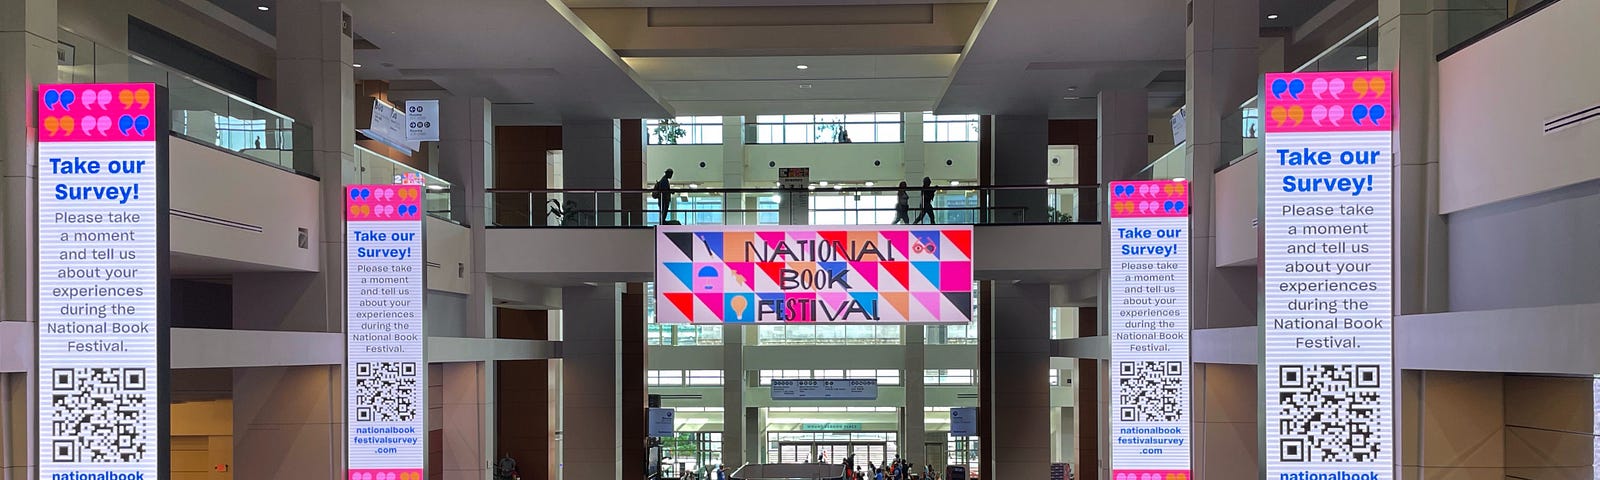 A busy convention center with a “National Book Conference” banner in the background